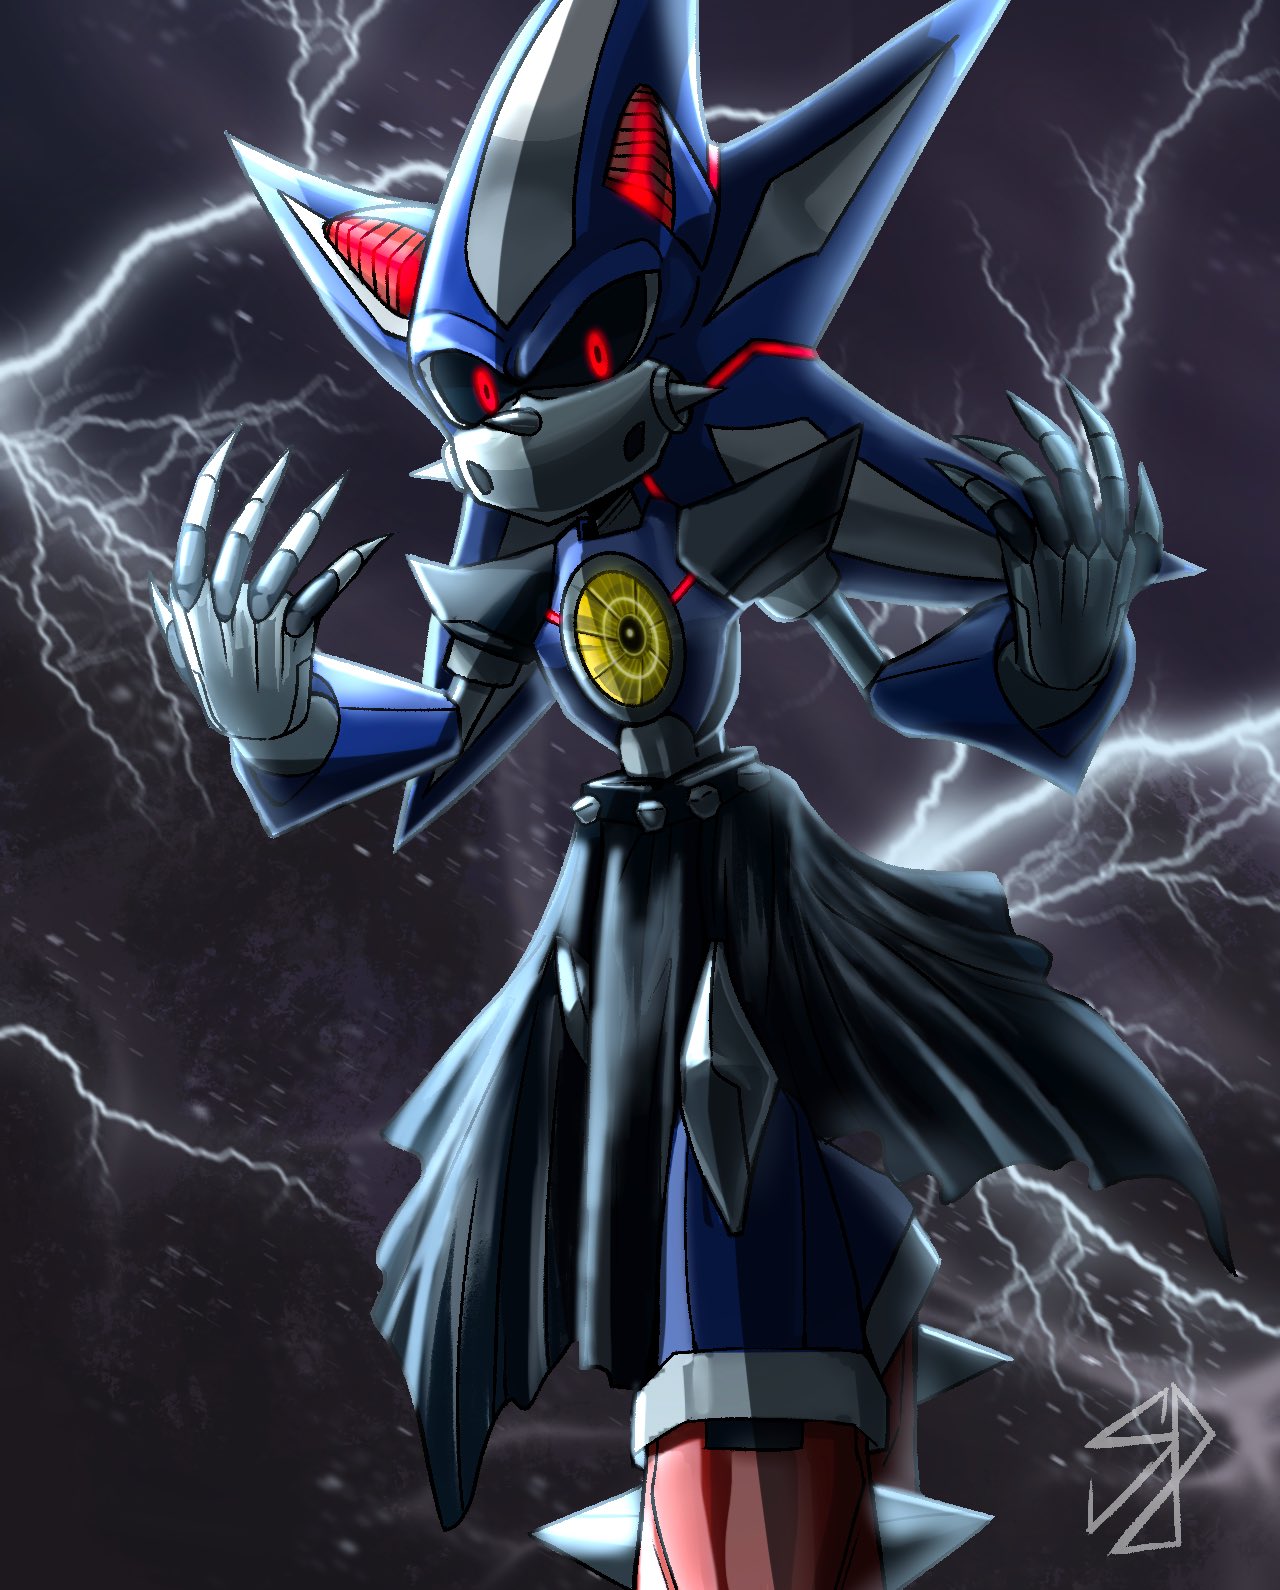 Neo Metal Sonic demands us to subscribe to Pewds by sonamy-666 on